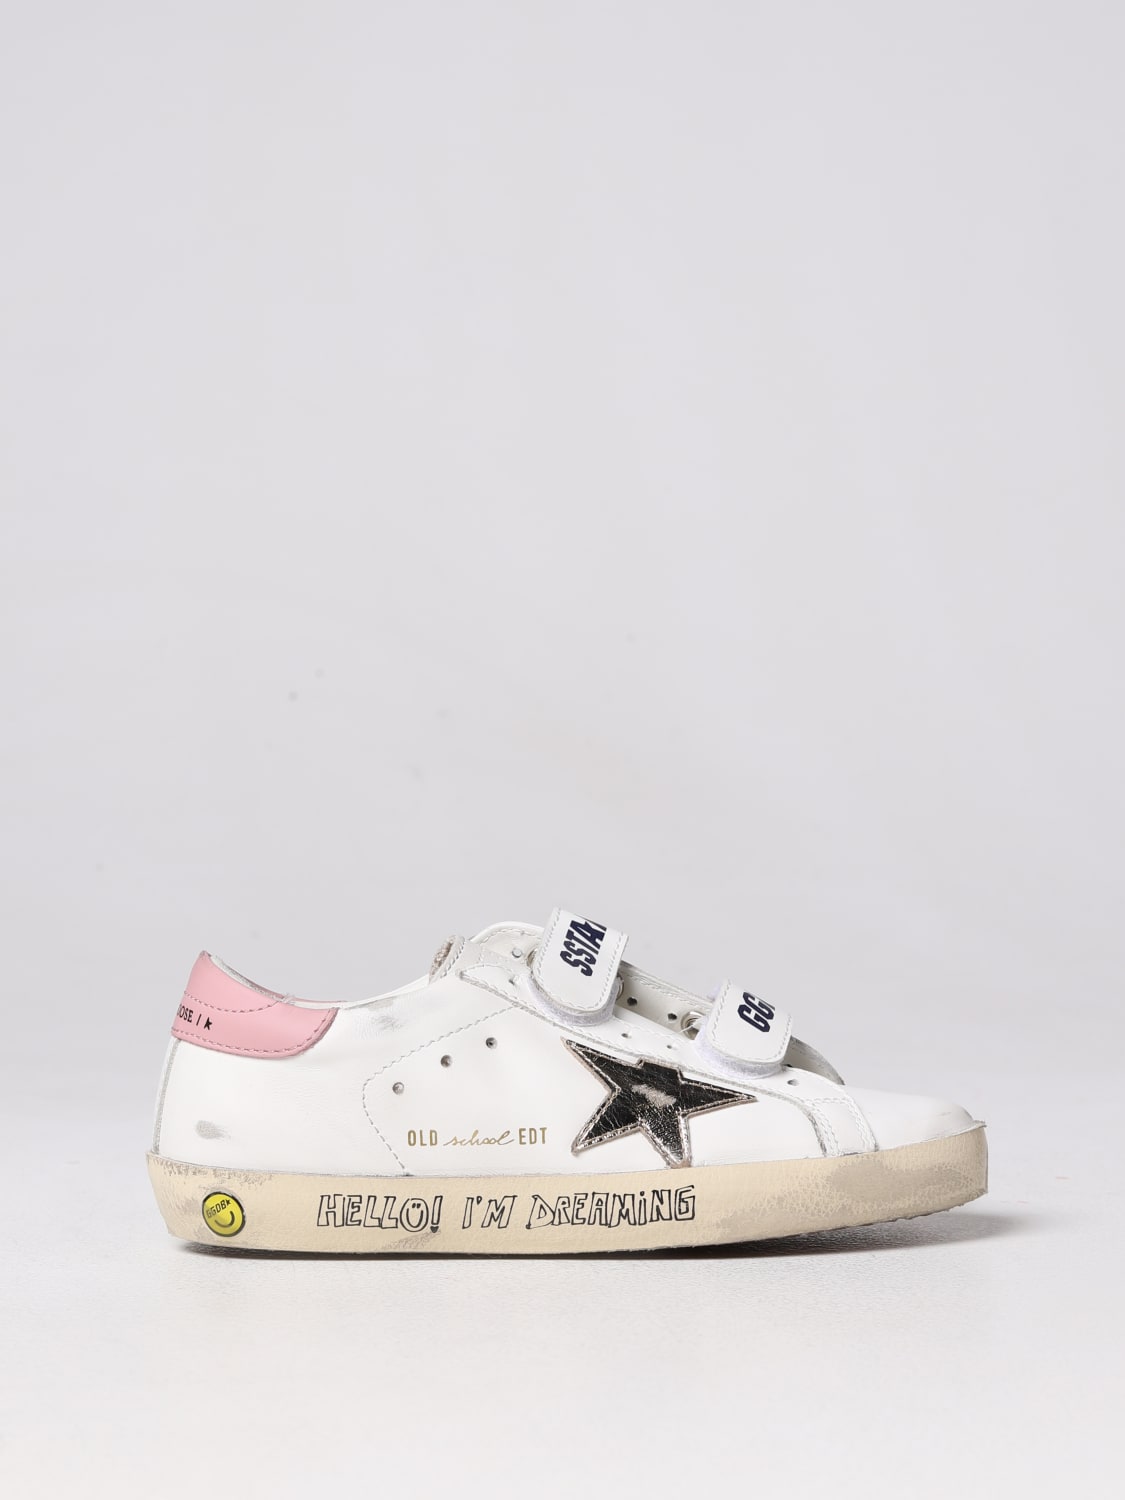 margen aften Løse GOLDEN GOOSE: Old School sneakers in used leather - White | Golden Goose  sneakers GYF00111F00421911399 online at GIGLIO.COM